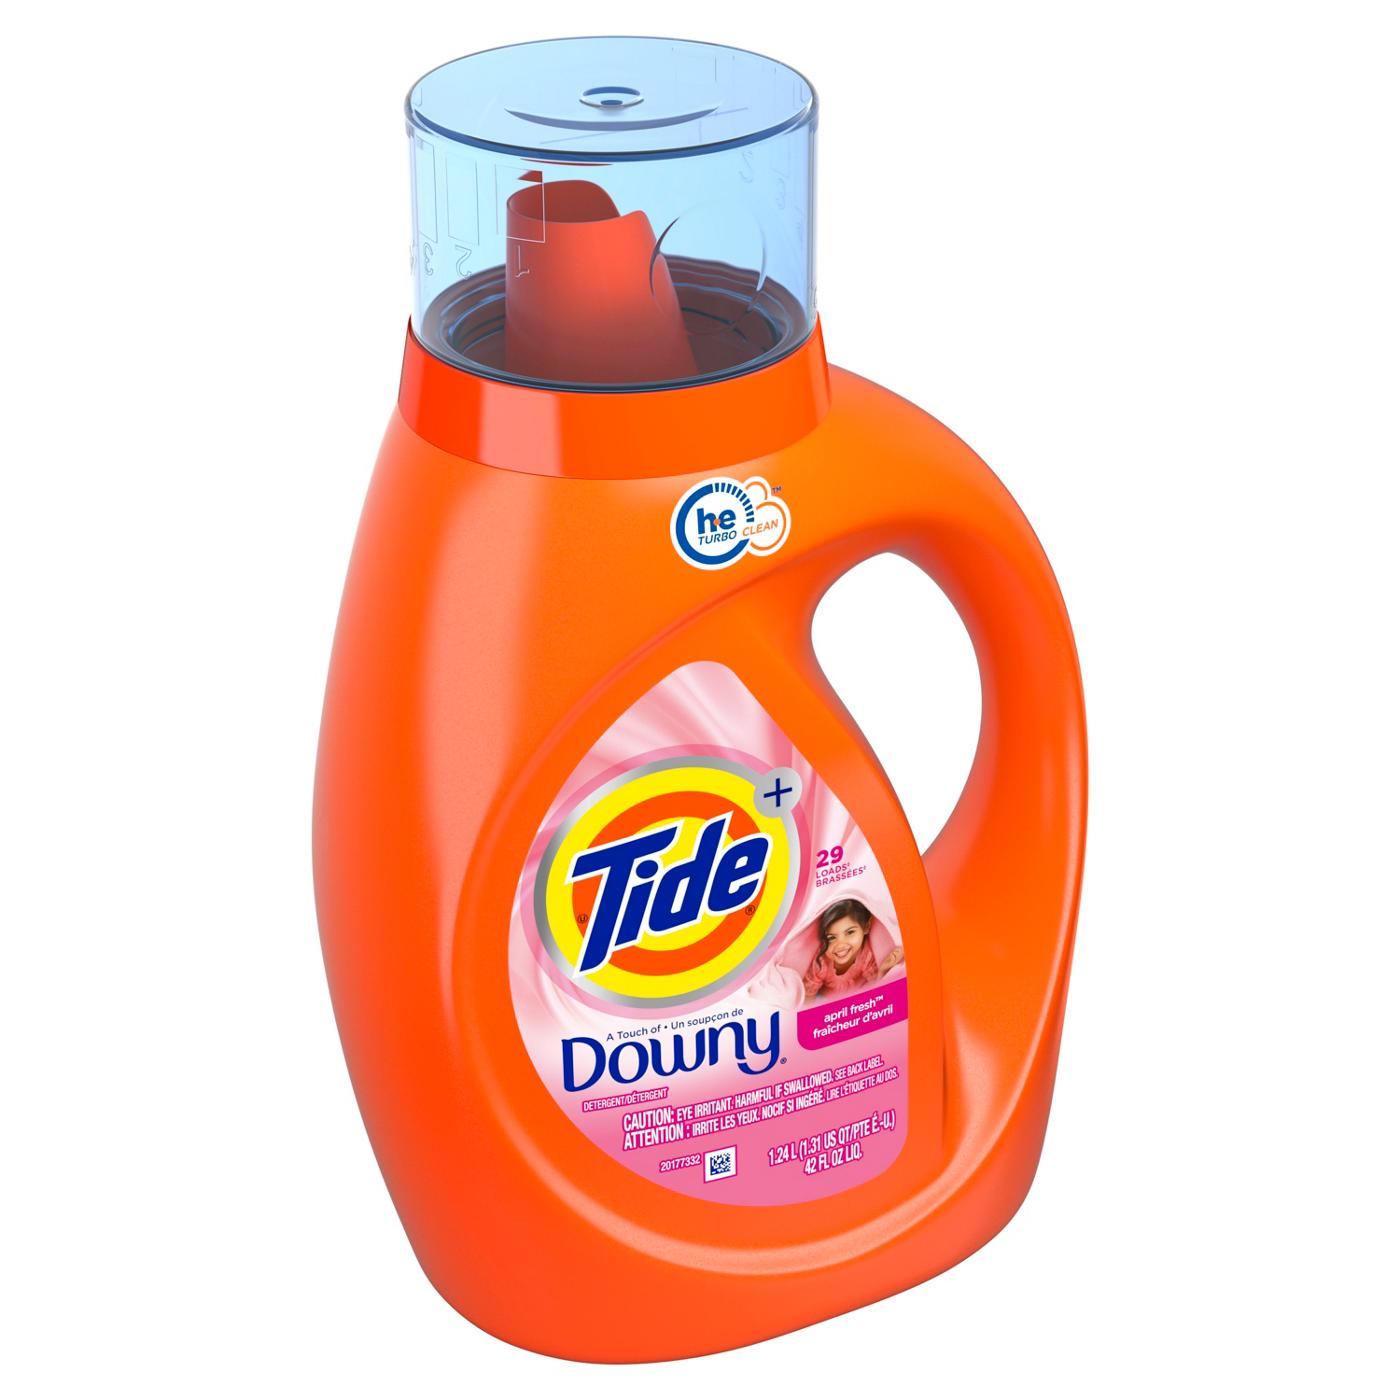 Tide + Downy HE Turbo Clean Liquid Laundry Detergent, 29 Loads - April Fresh; image 6 of 12